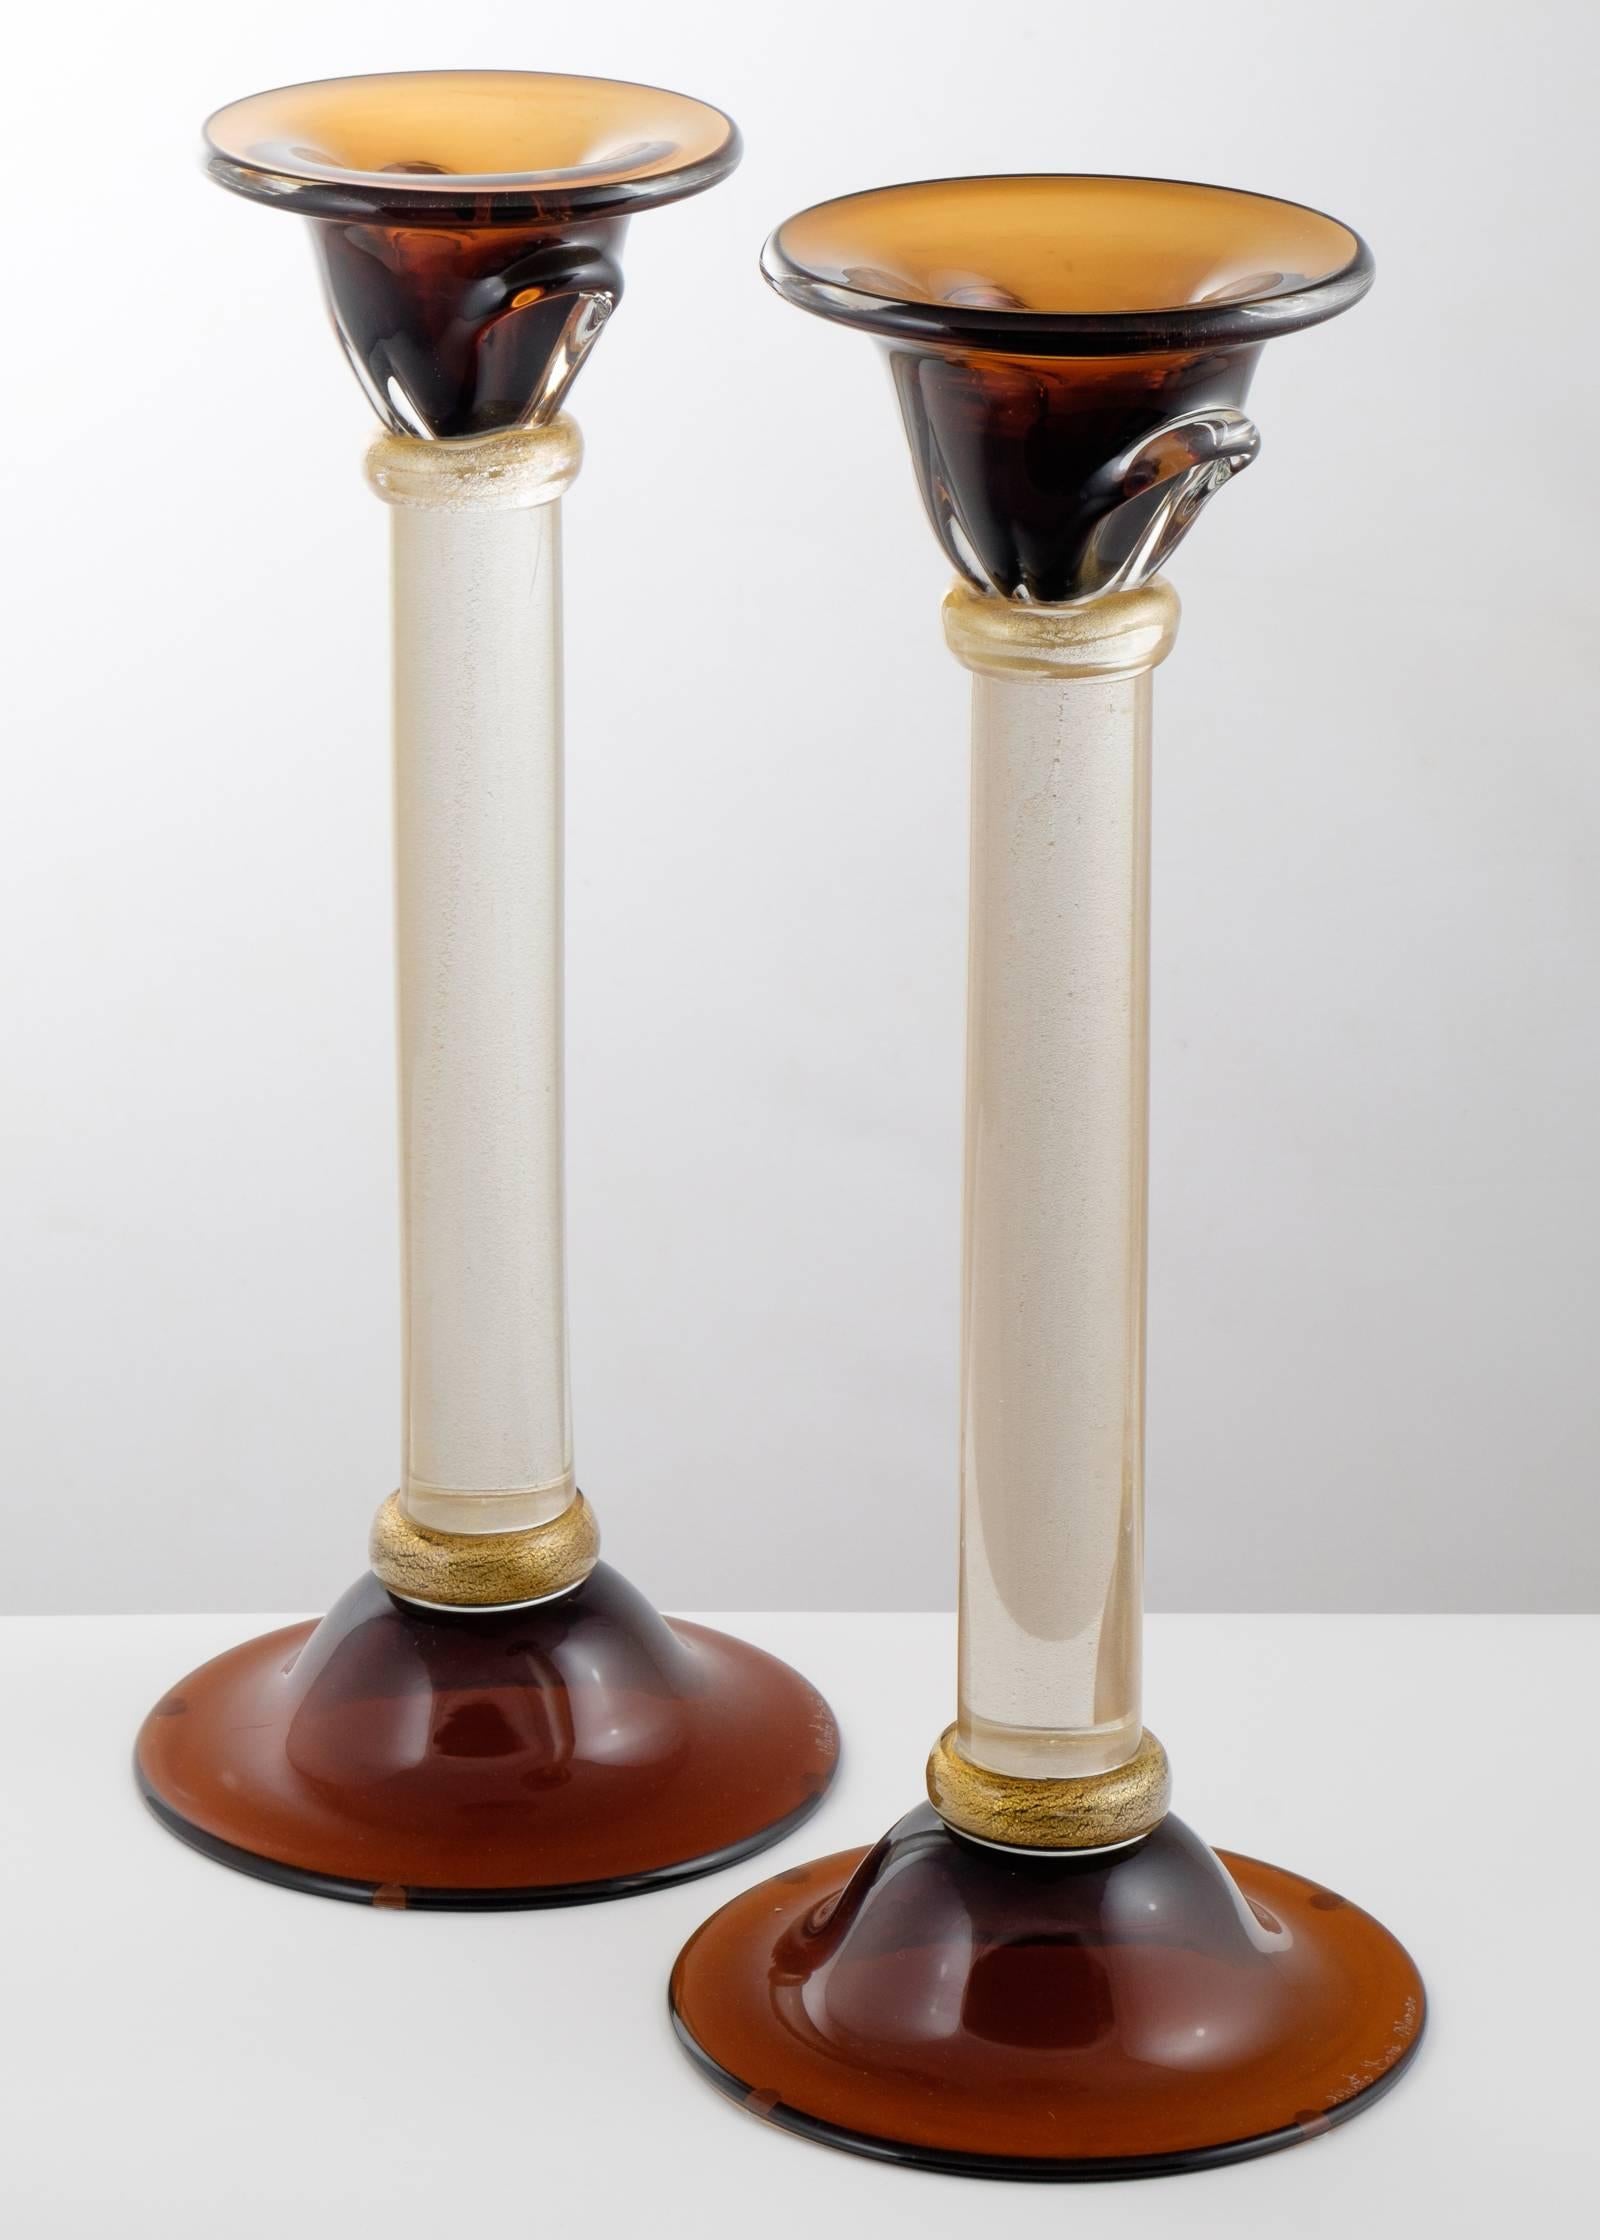 Murano glass pair of candlesticks with 